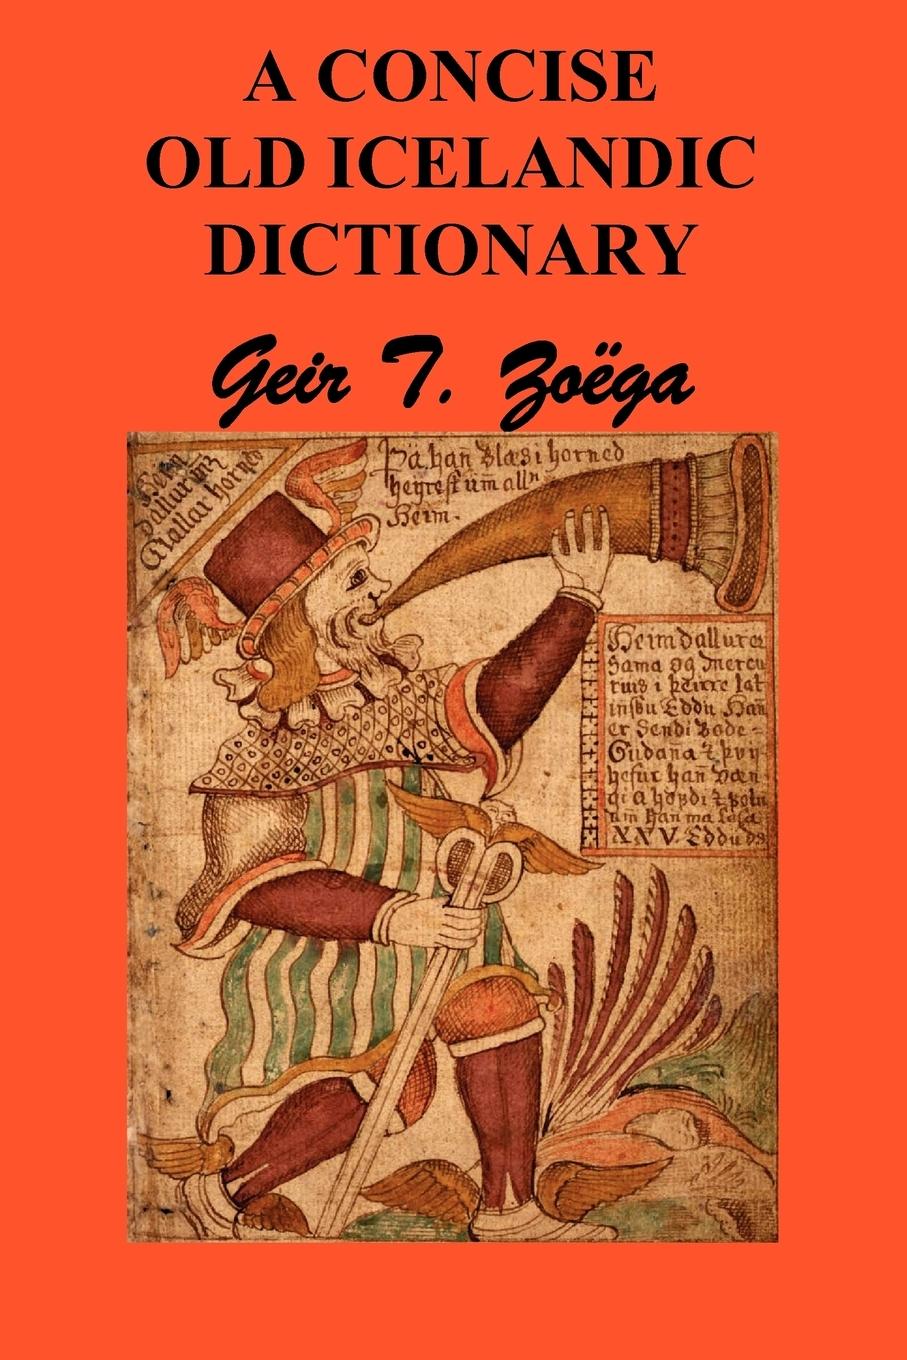 A Concise Dictionary of Old Icelandic - Zoga, Geir T. Zoega, Geir T.